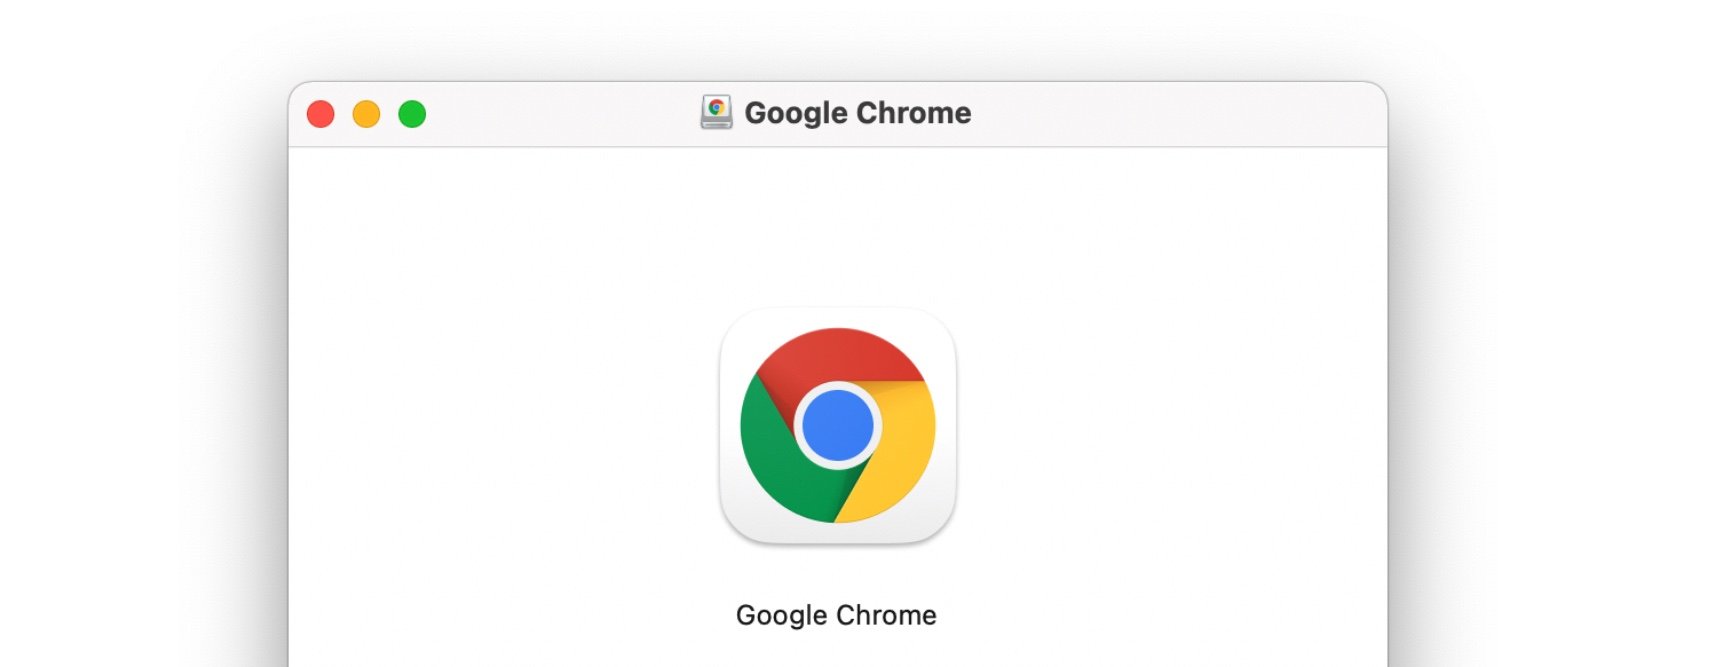 Google Chrome will add copy and paste functionality to PC